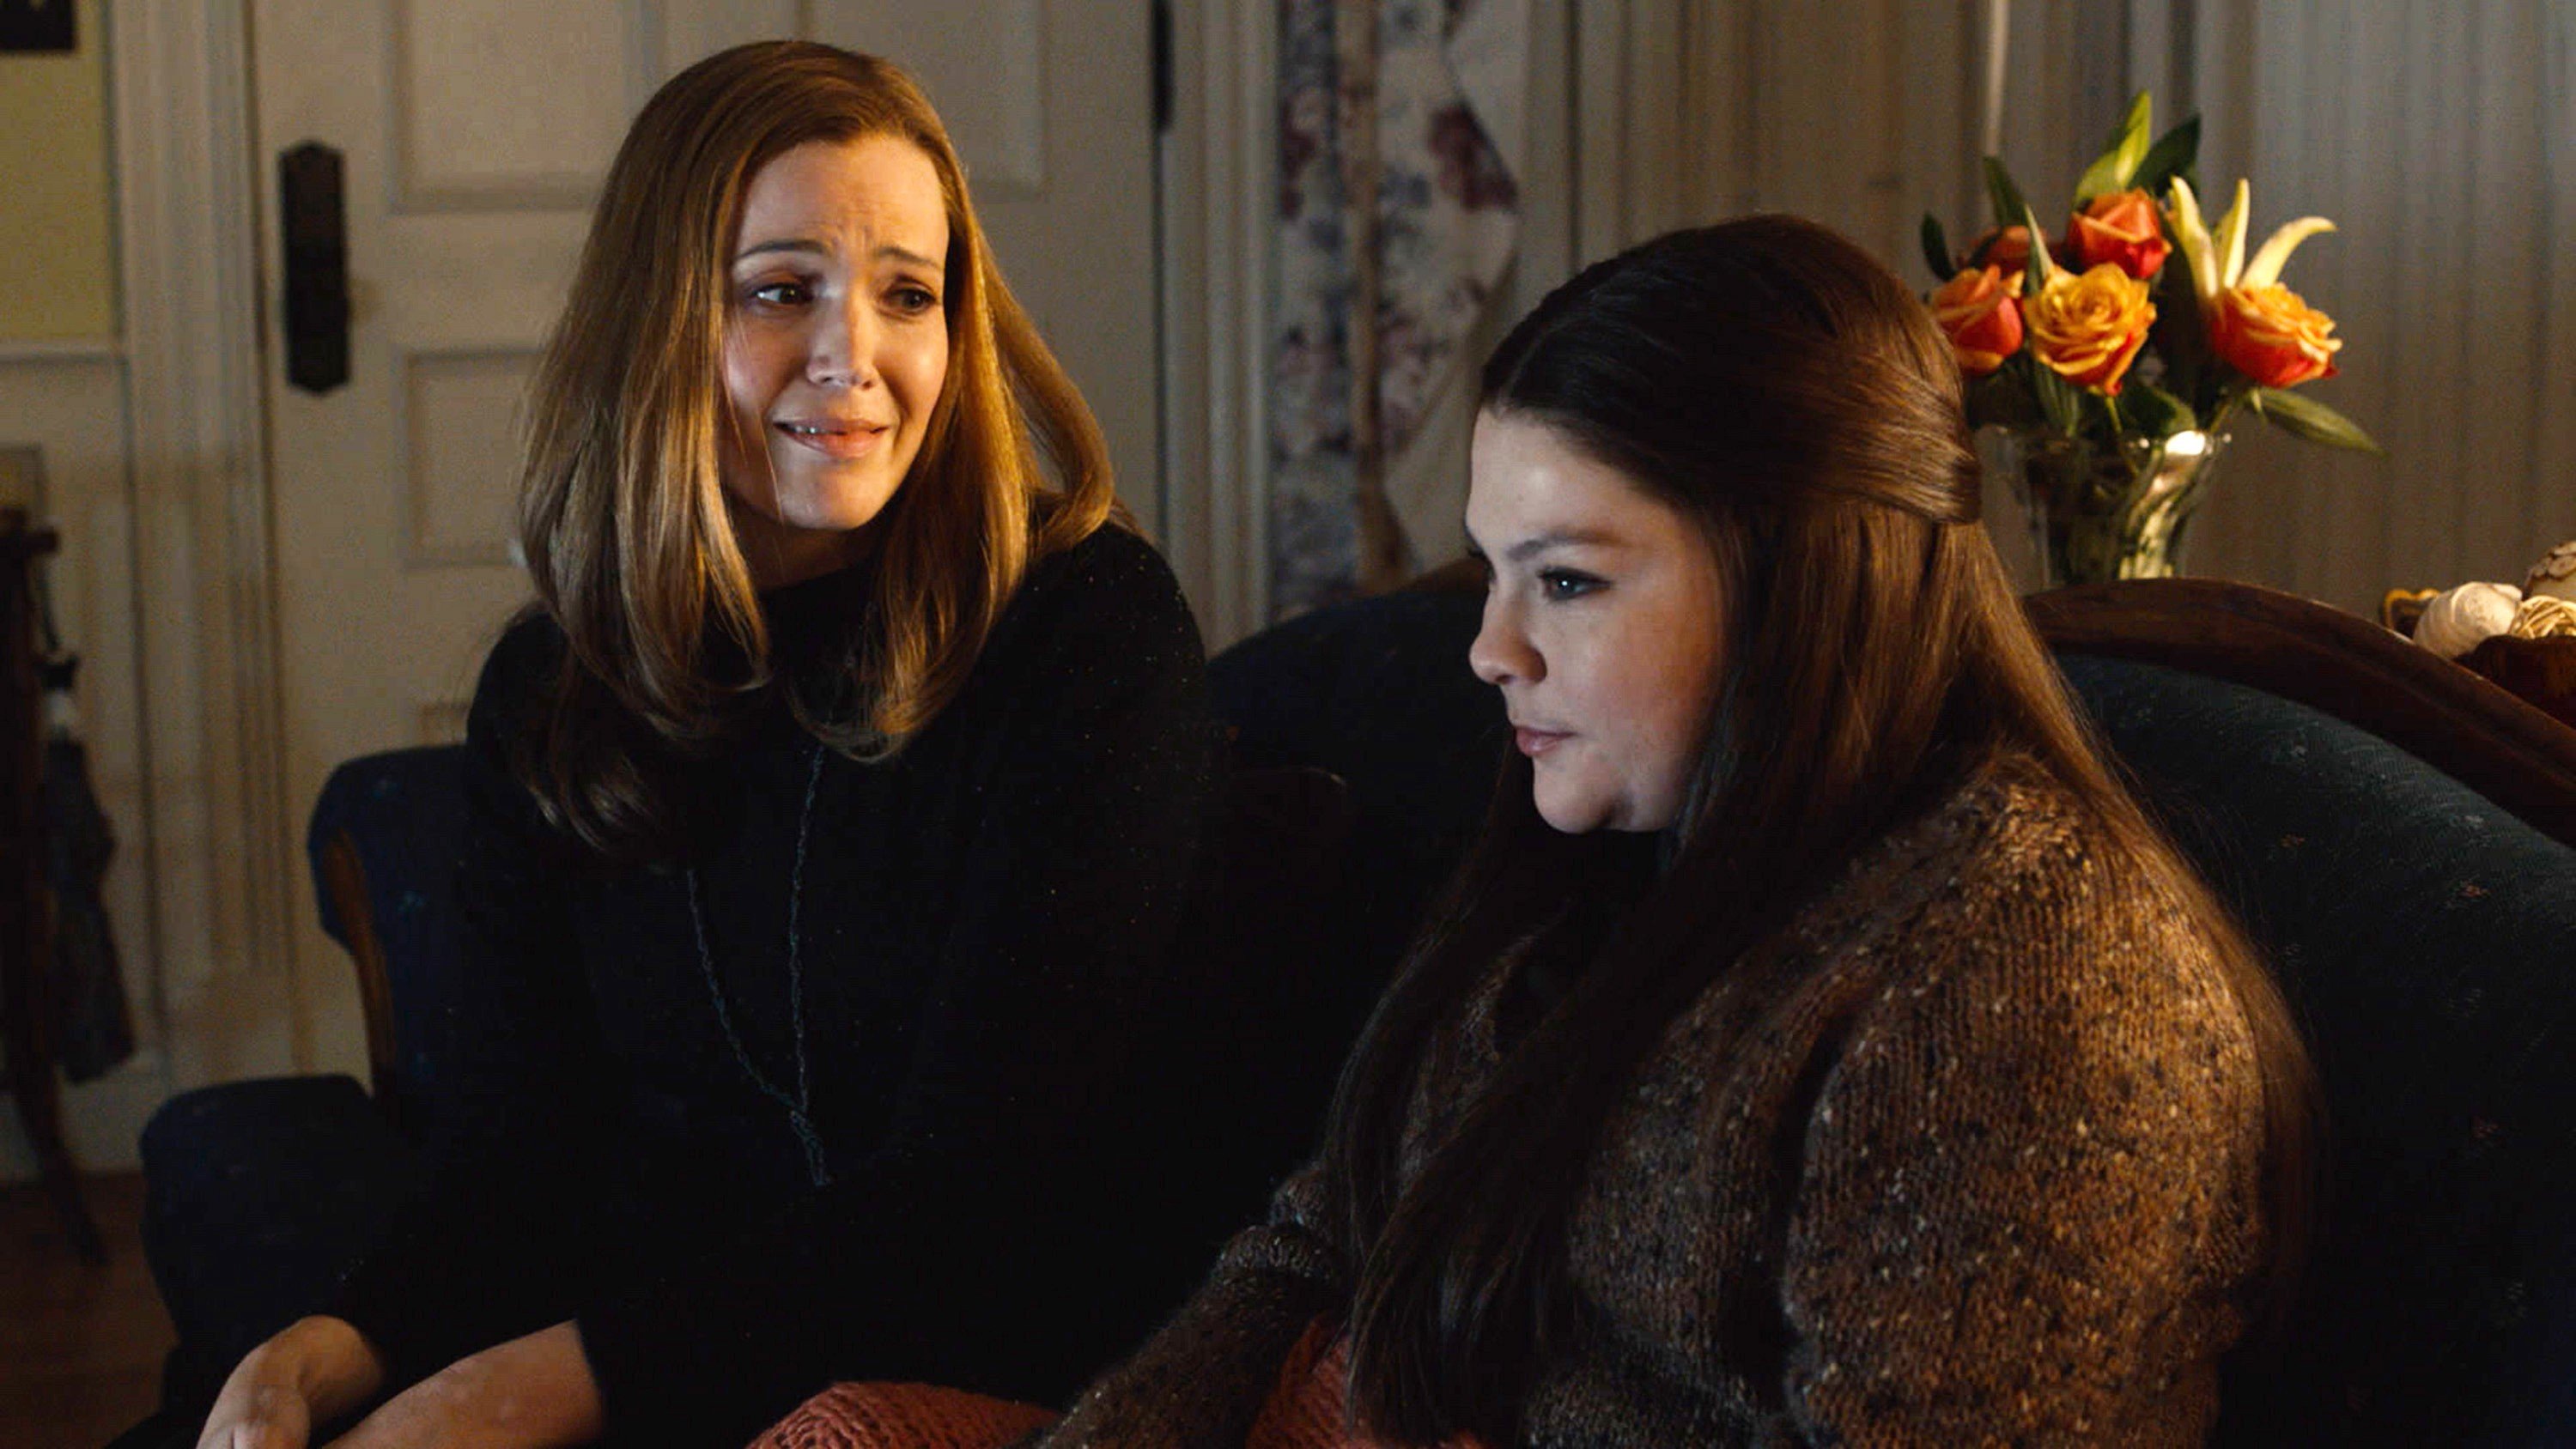 Mandy Moore and Hannah Zeile photographed during a scene from "This Is Us."